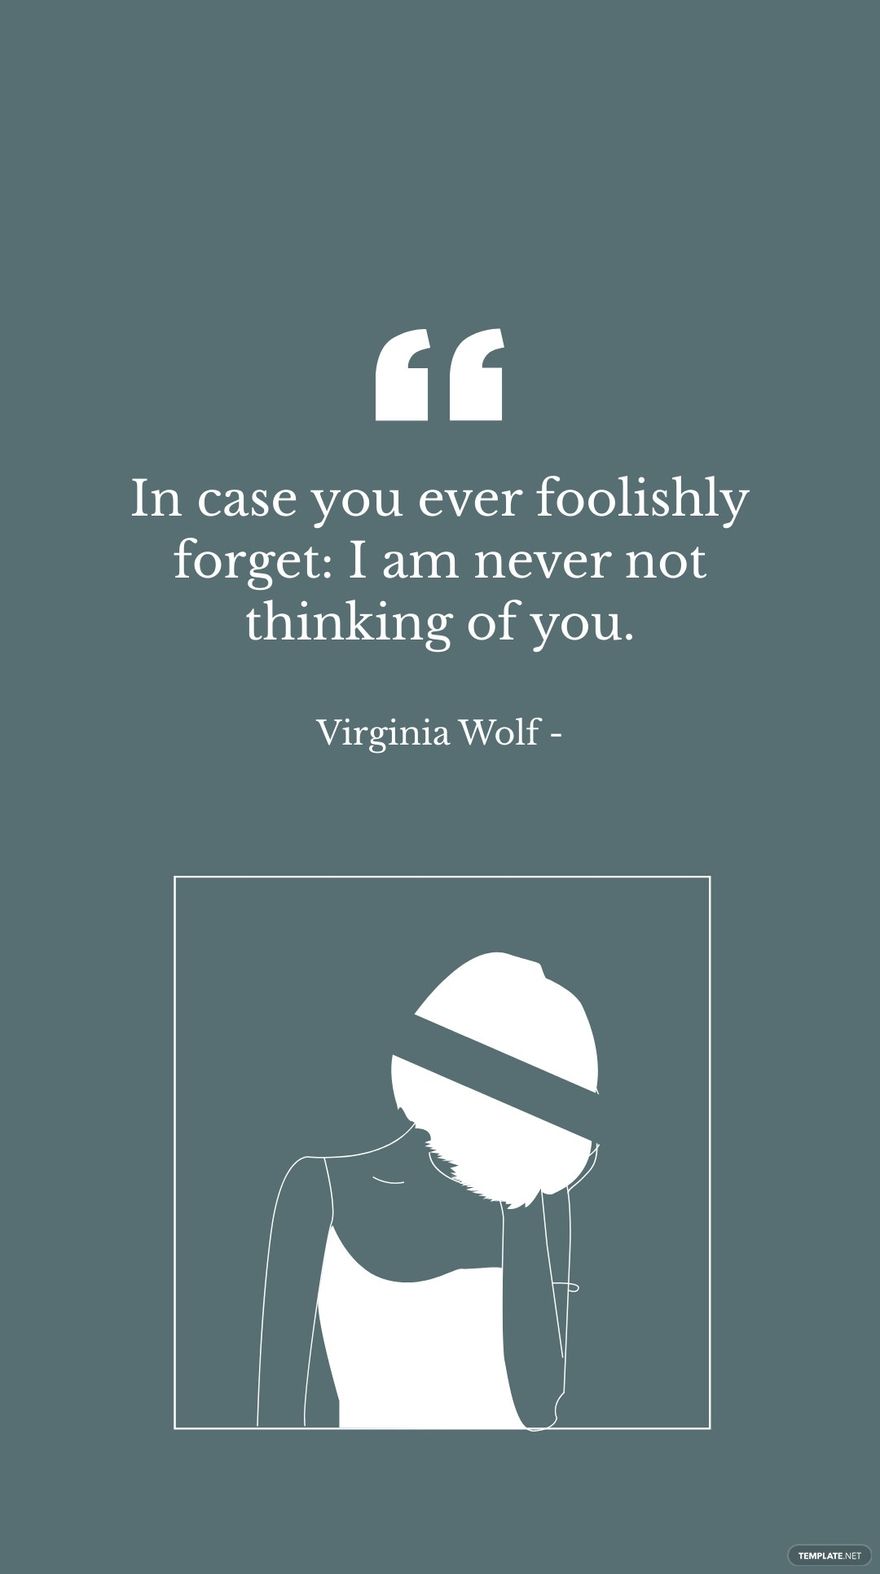 Free Virginia Wolf - In case you ever foolishly forget: I am never not thinking of you.